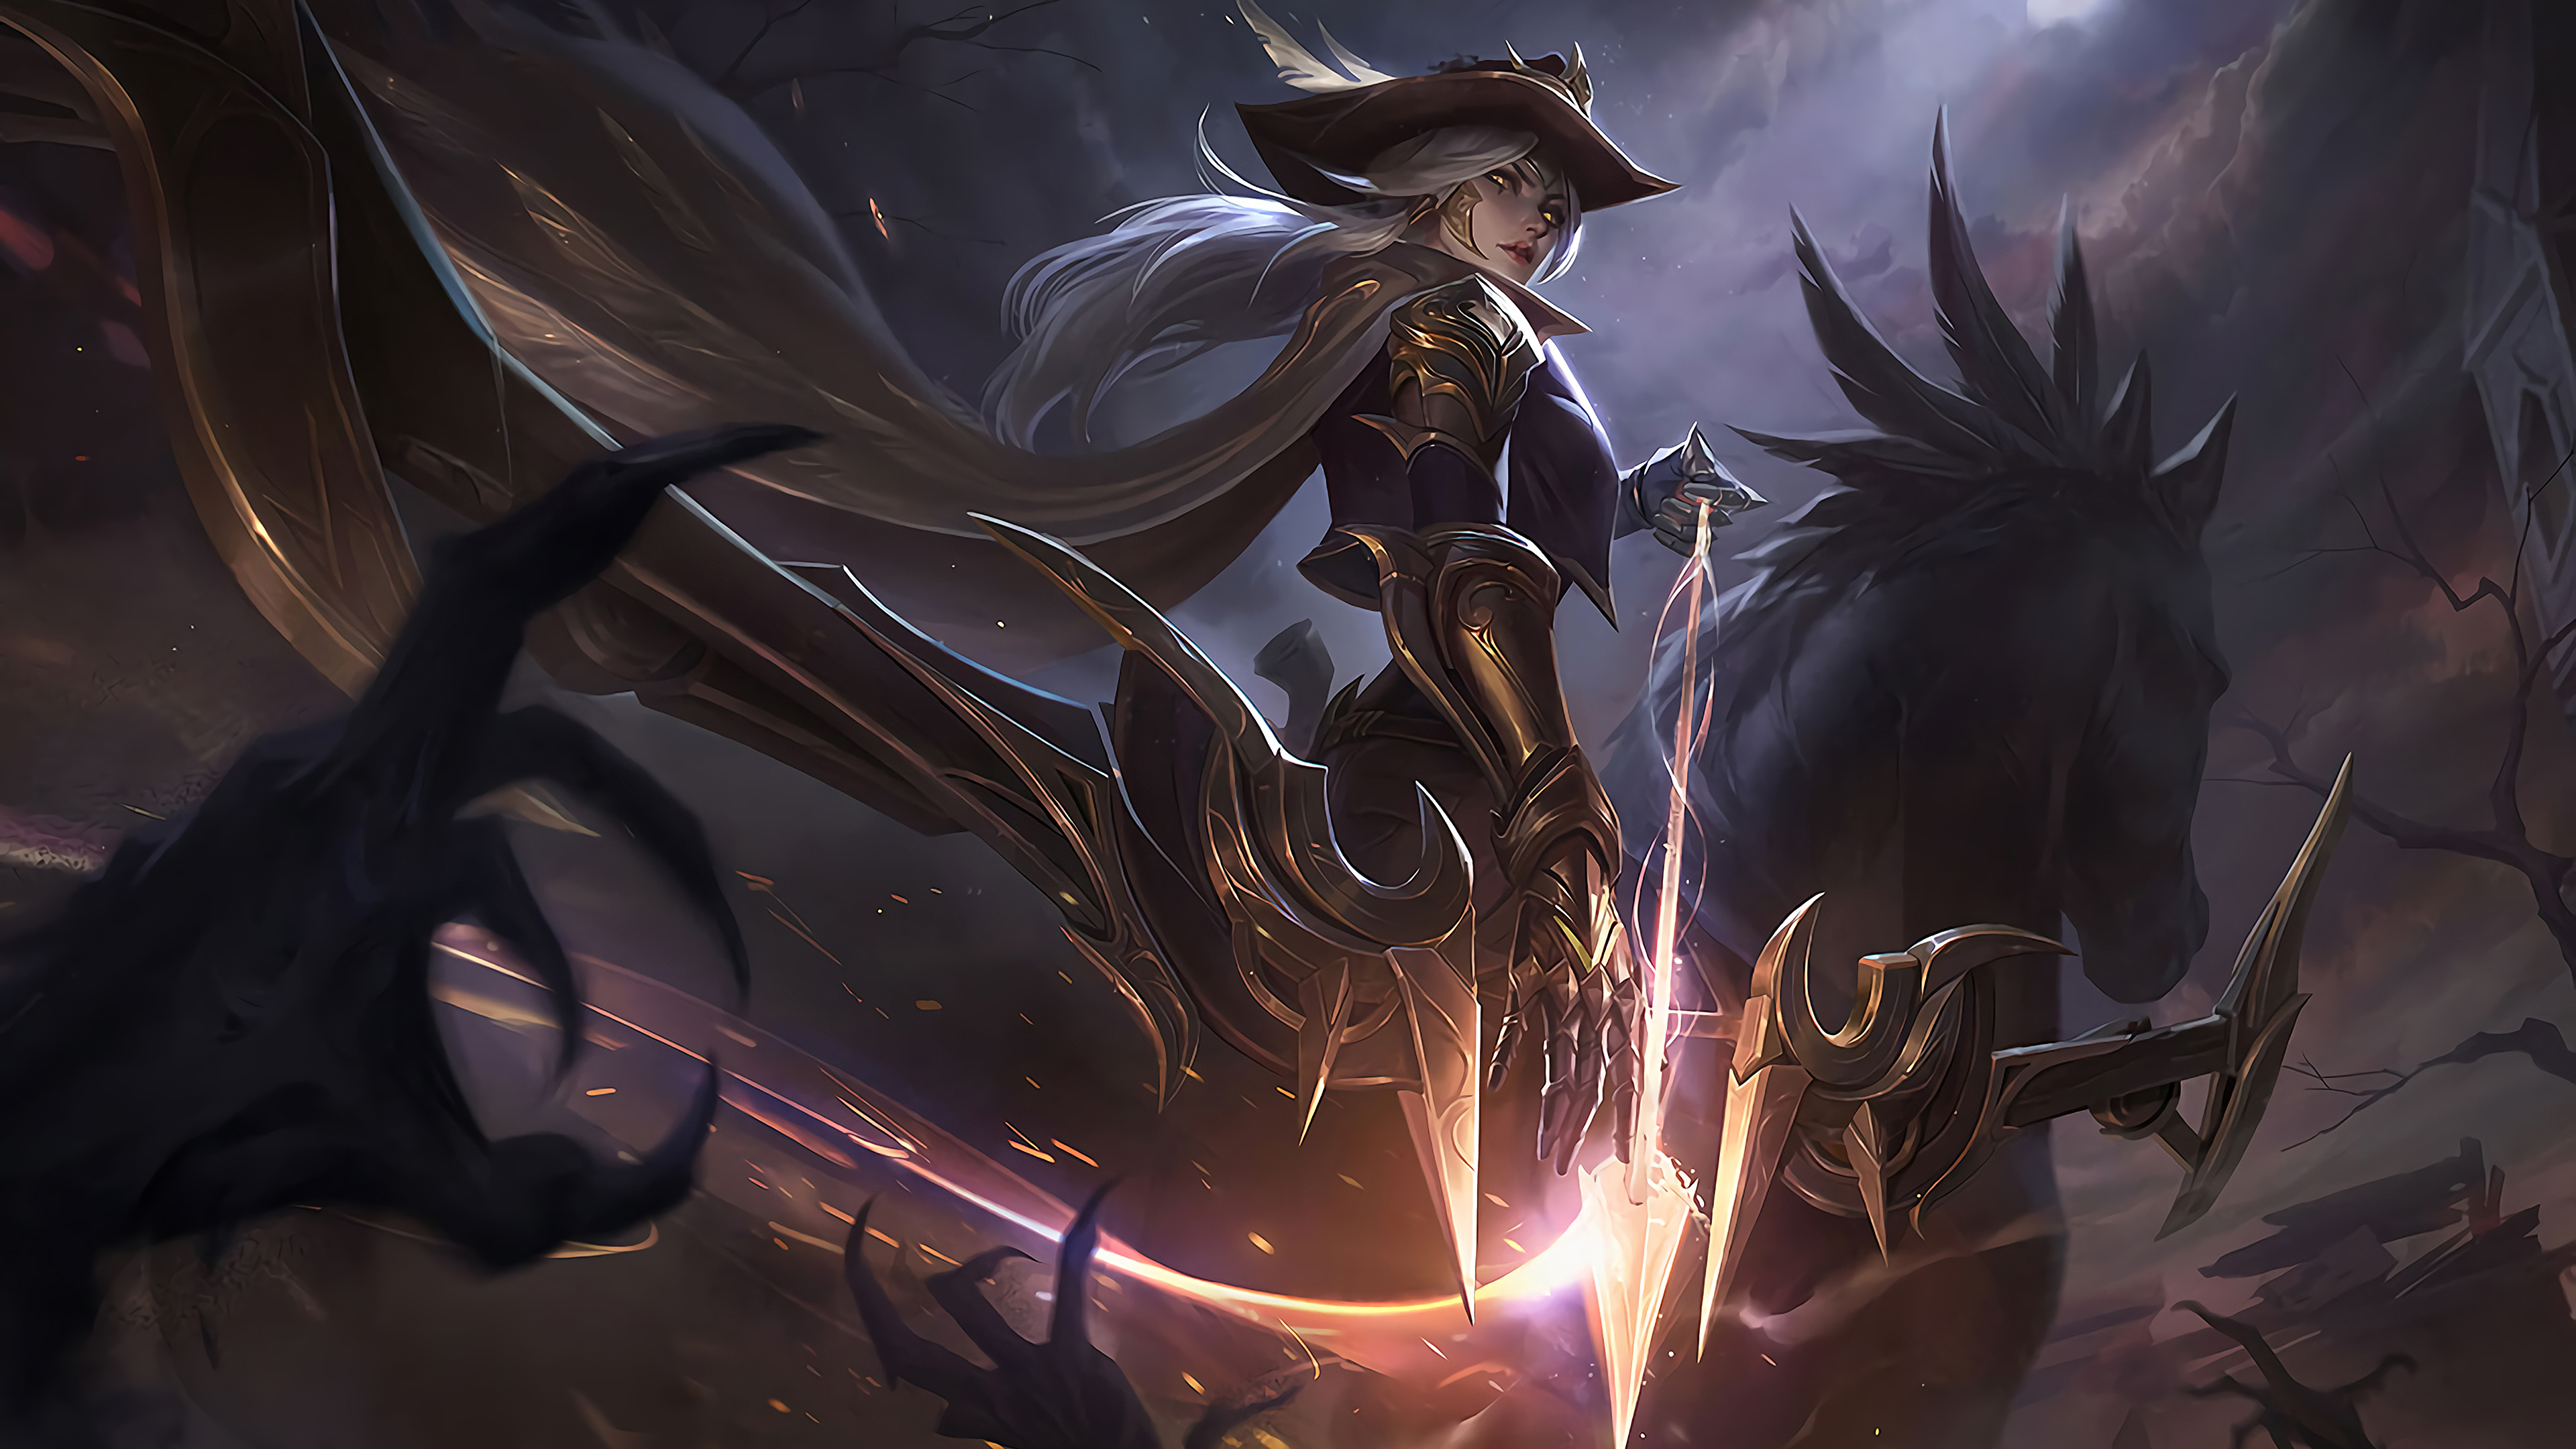 General 3840x2160 Ashe (League of Legends) League of Legends Riot Games ADC GZG bow horse video game girls video game characters armor video game art PC gaming High Noon (League of Legends)